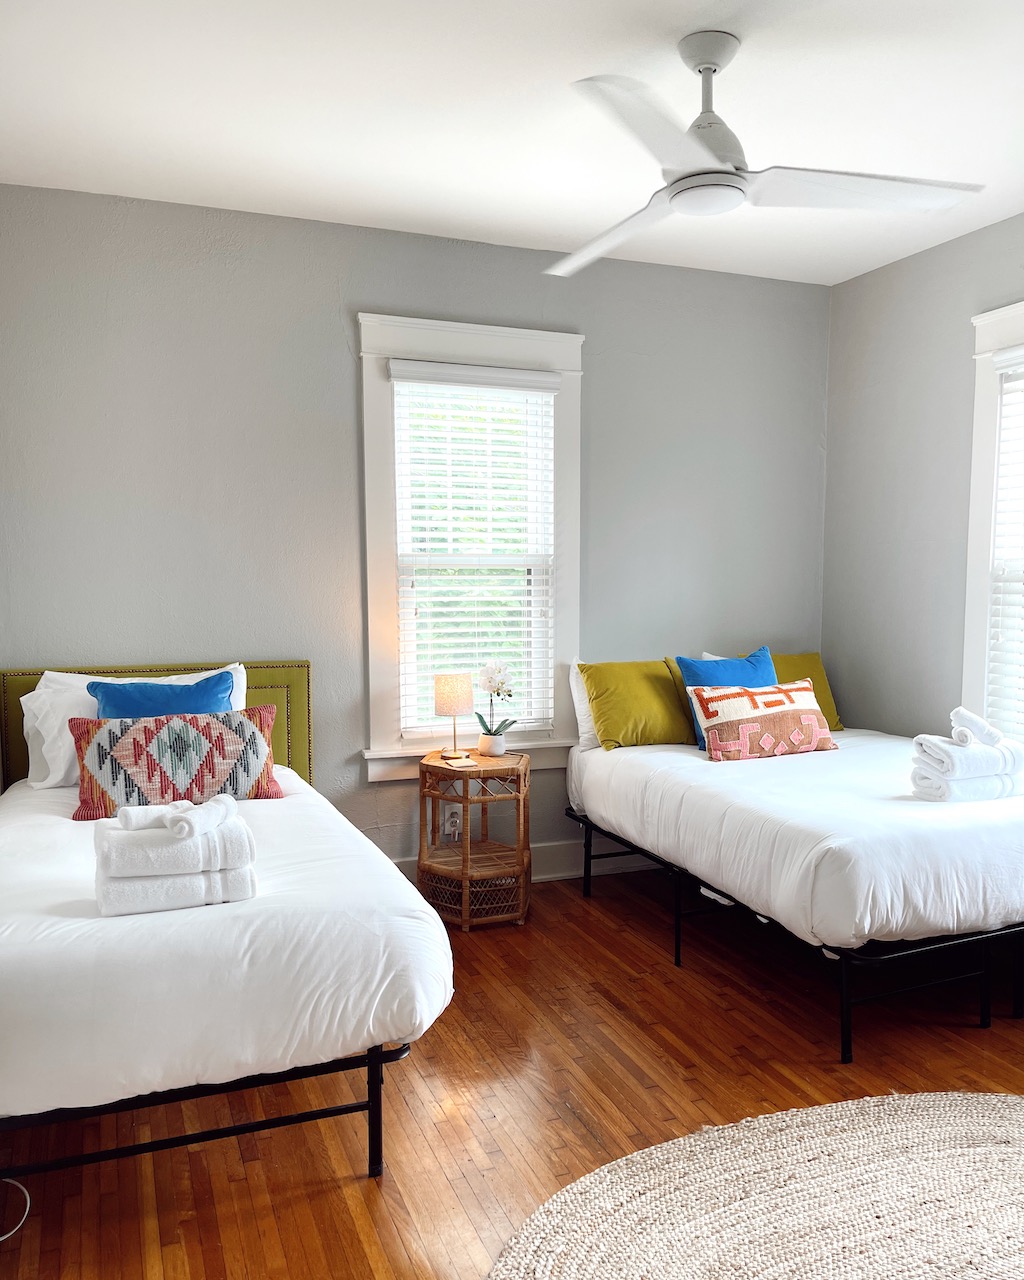 The Cutest Airbnb For A Girls Trip To Nashville